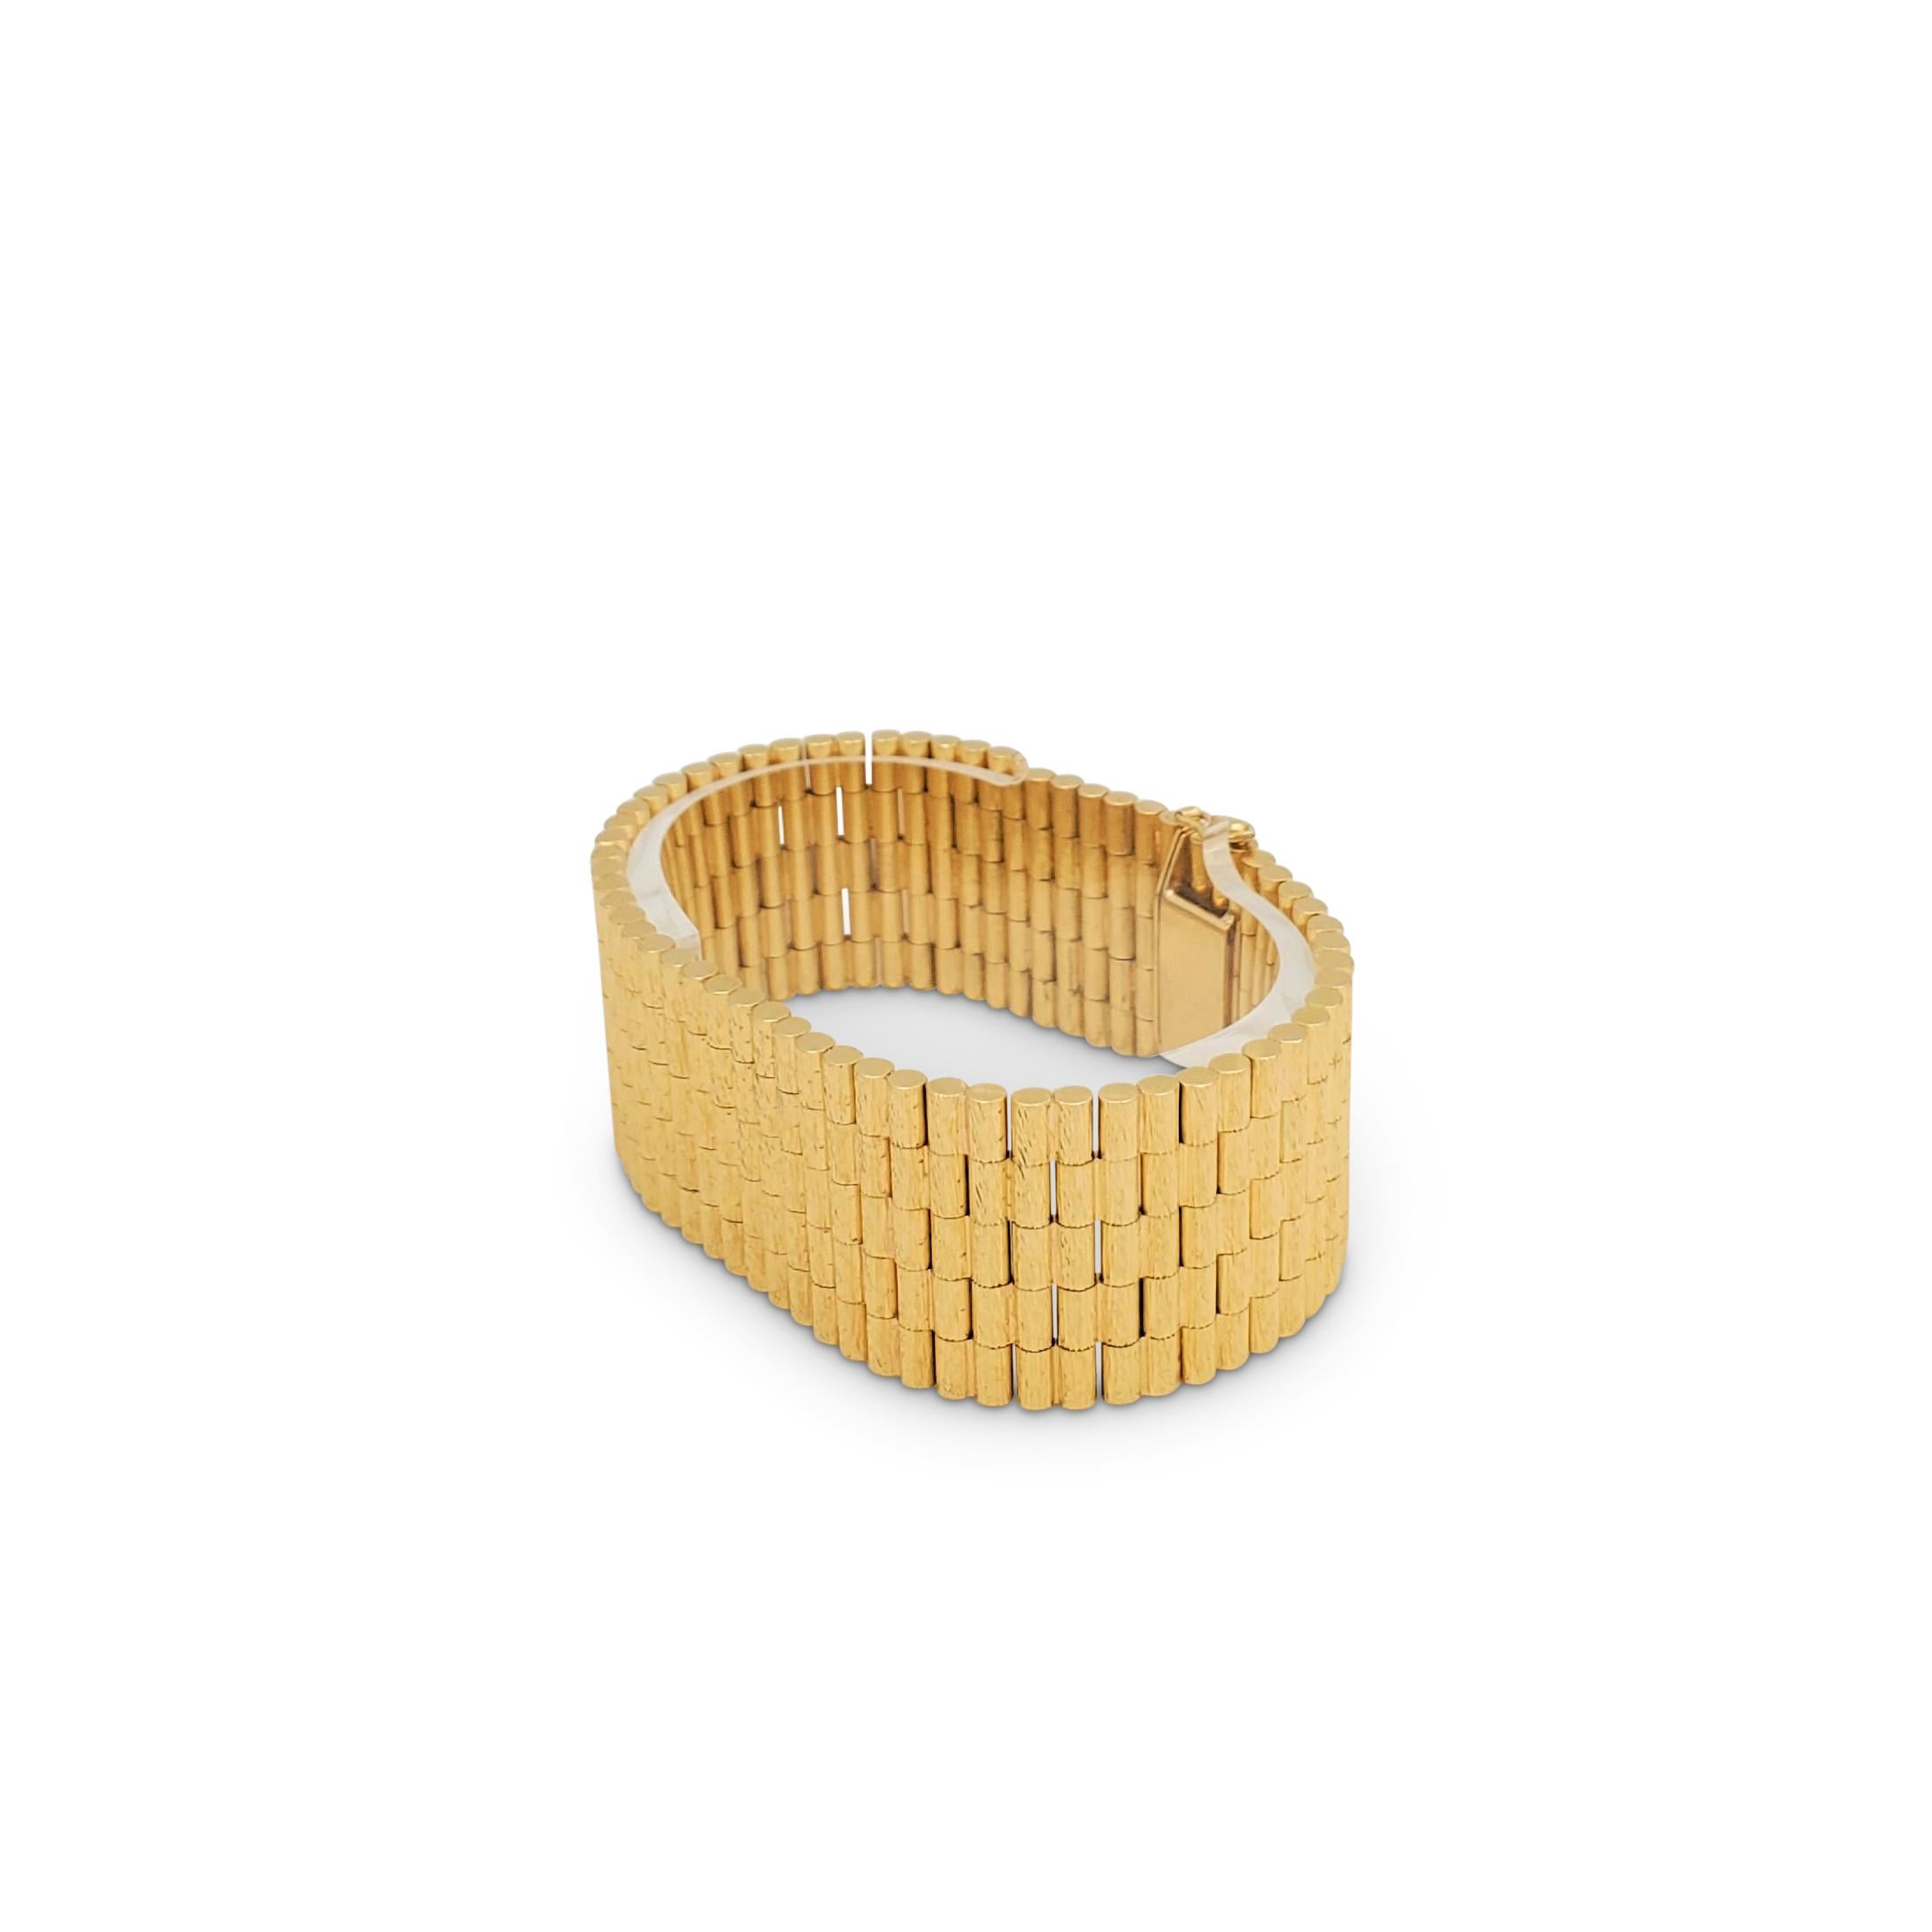 A wearable wide bracelet crafted in 18 karat gold comprised of cylindrical links that feature a bark finish. Indiscernible hallmarks present. The bracelet is not presented with the original box or papers. CIRCA 2000s.

Bracelet Length: 7 1/2